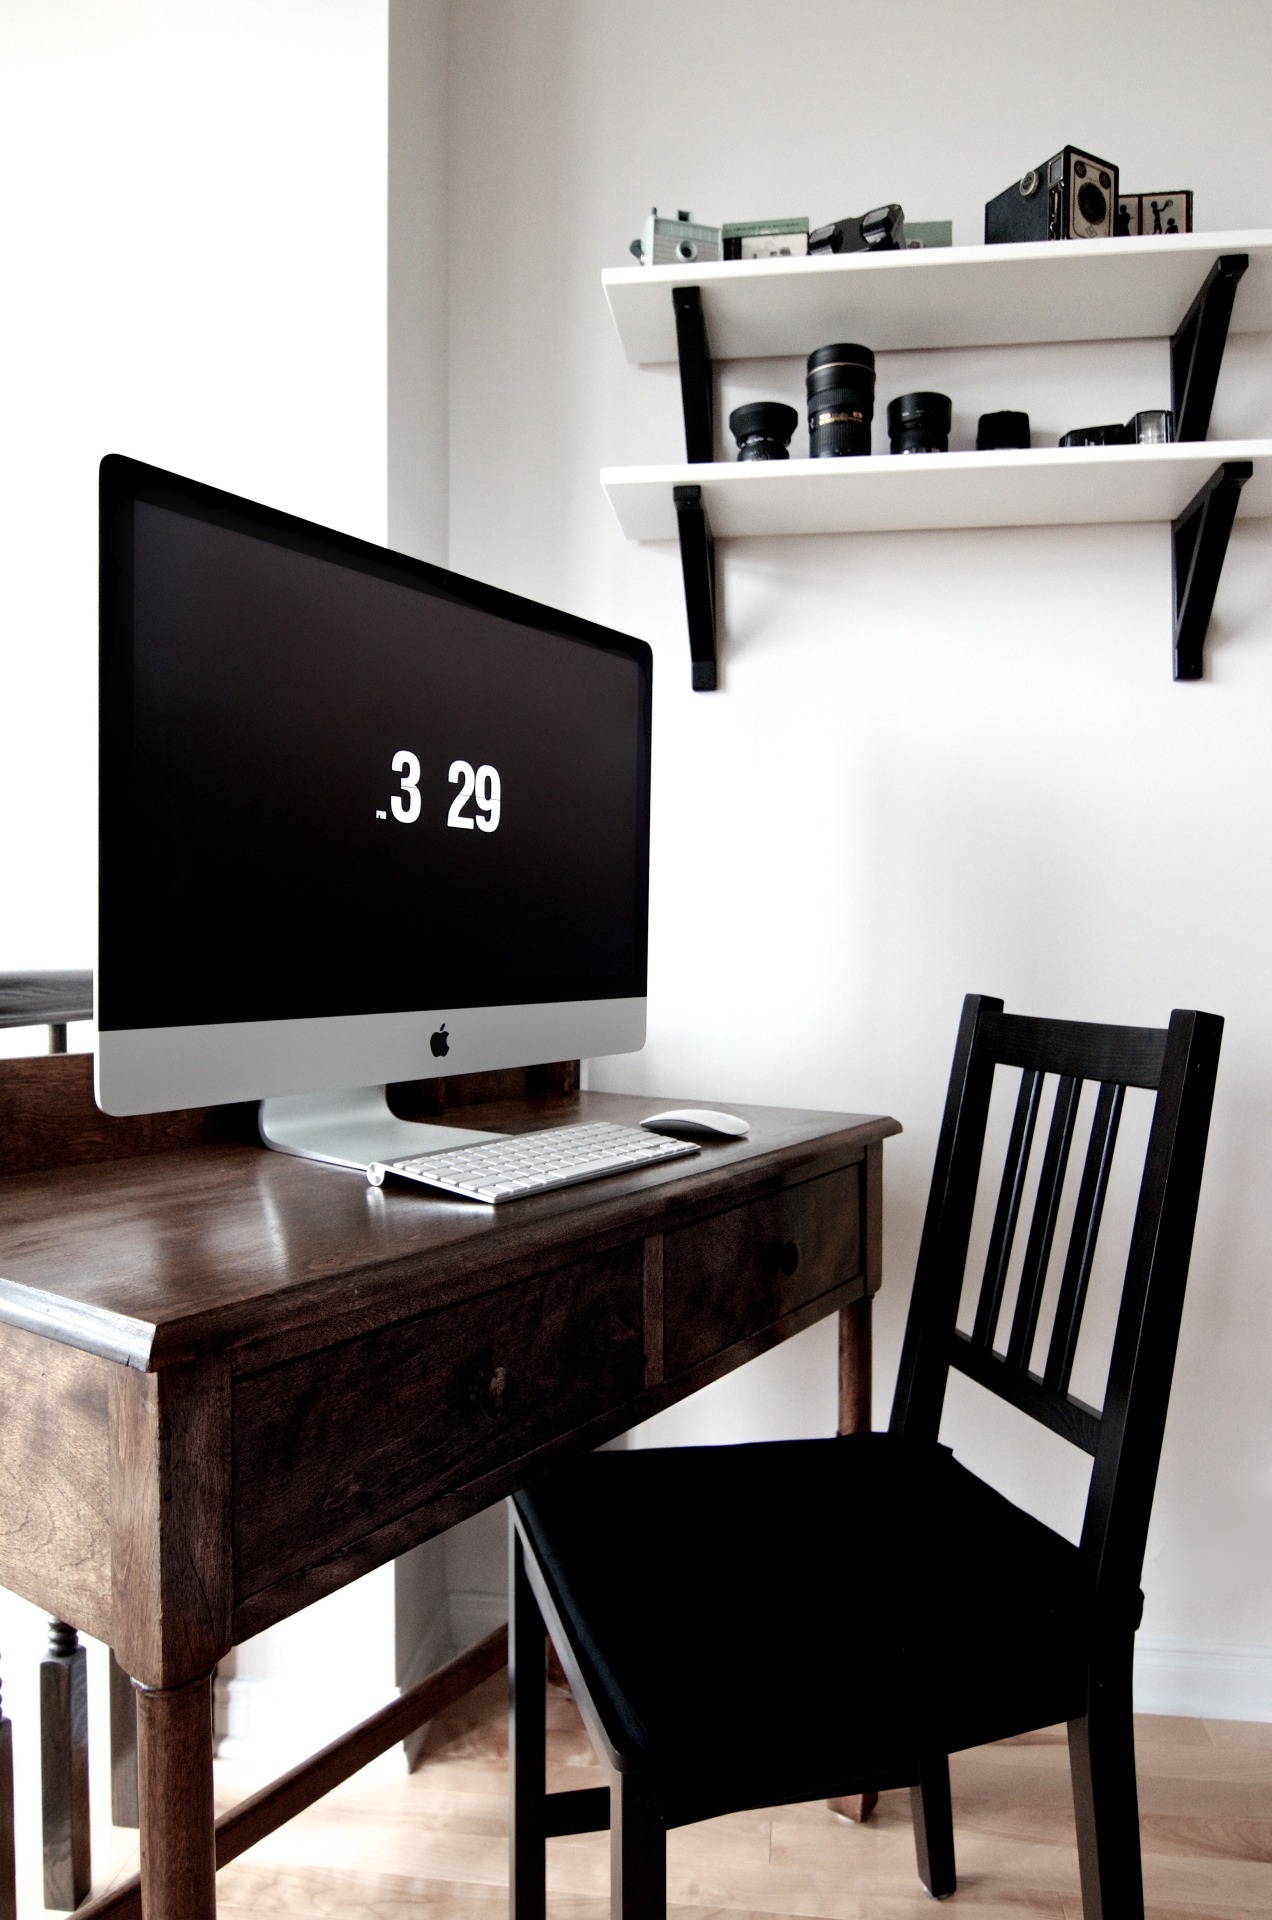 Mostlyperfect submitted this elegantly simple wood desk.